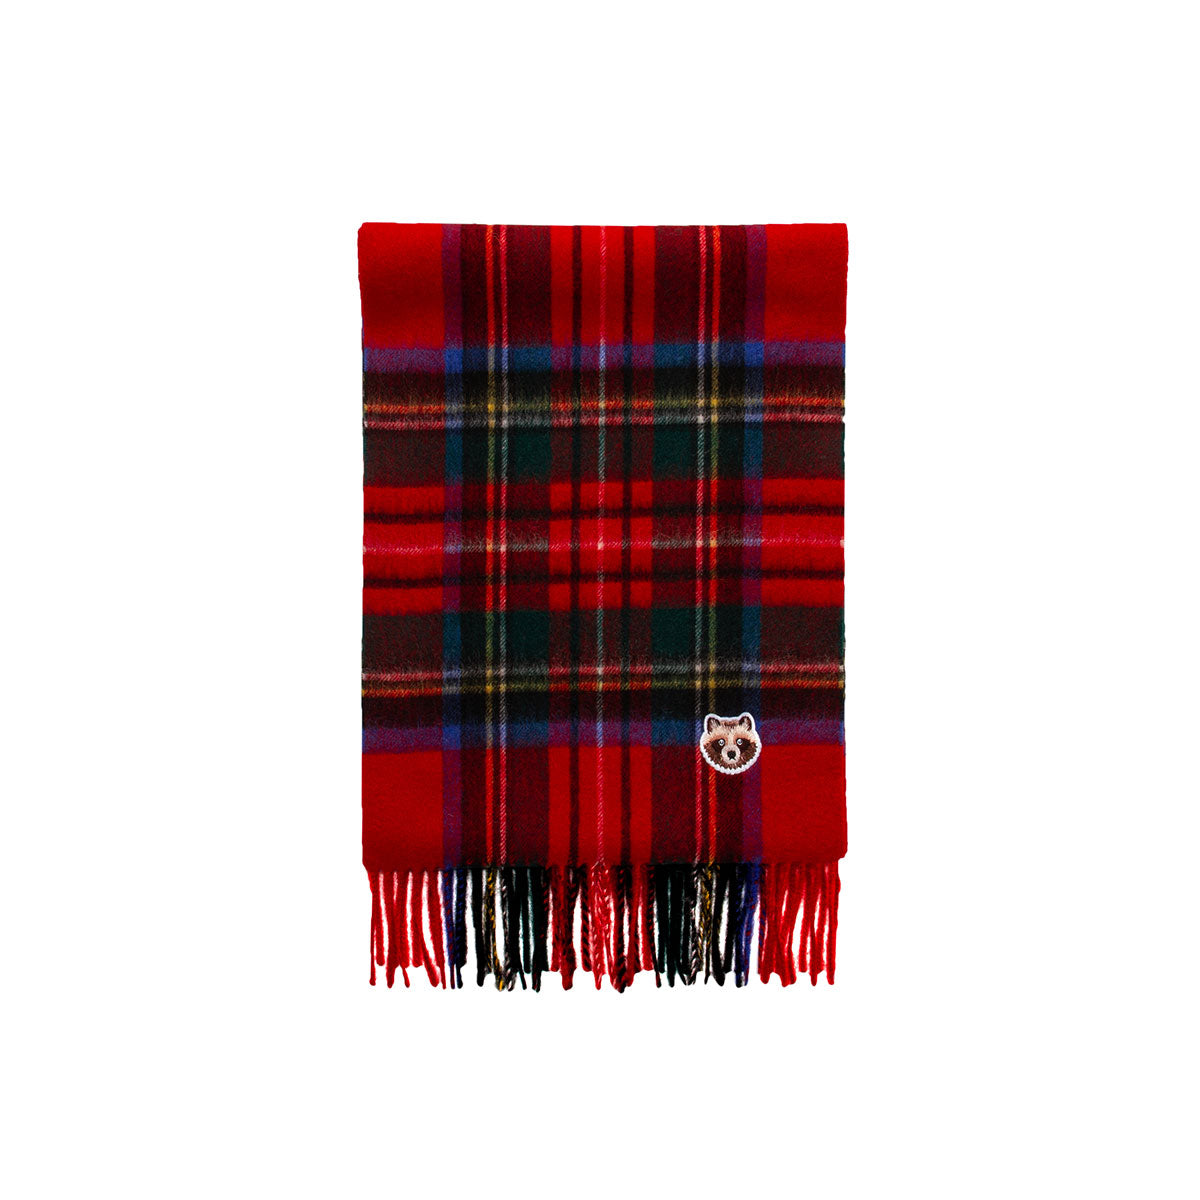 Wappen Wool Scarf (マフラー) - Red Check